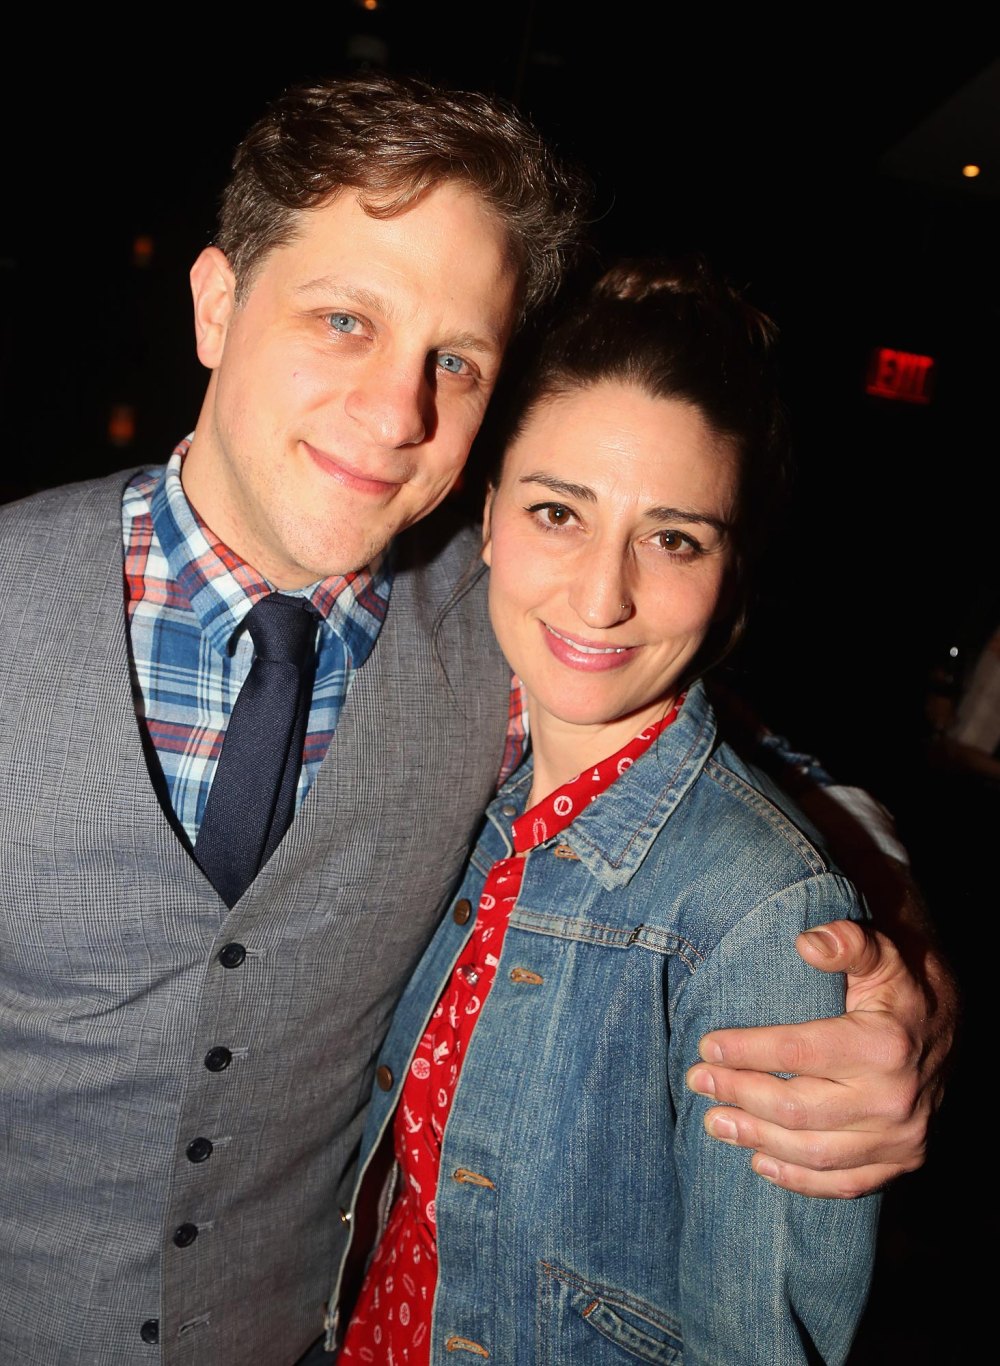 Sara Bareilles and Joe Tippett s Relationship Timeline How They Met Their Engagement and More 113